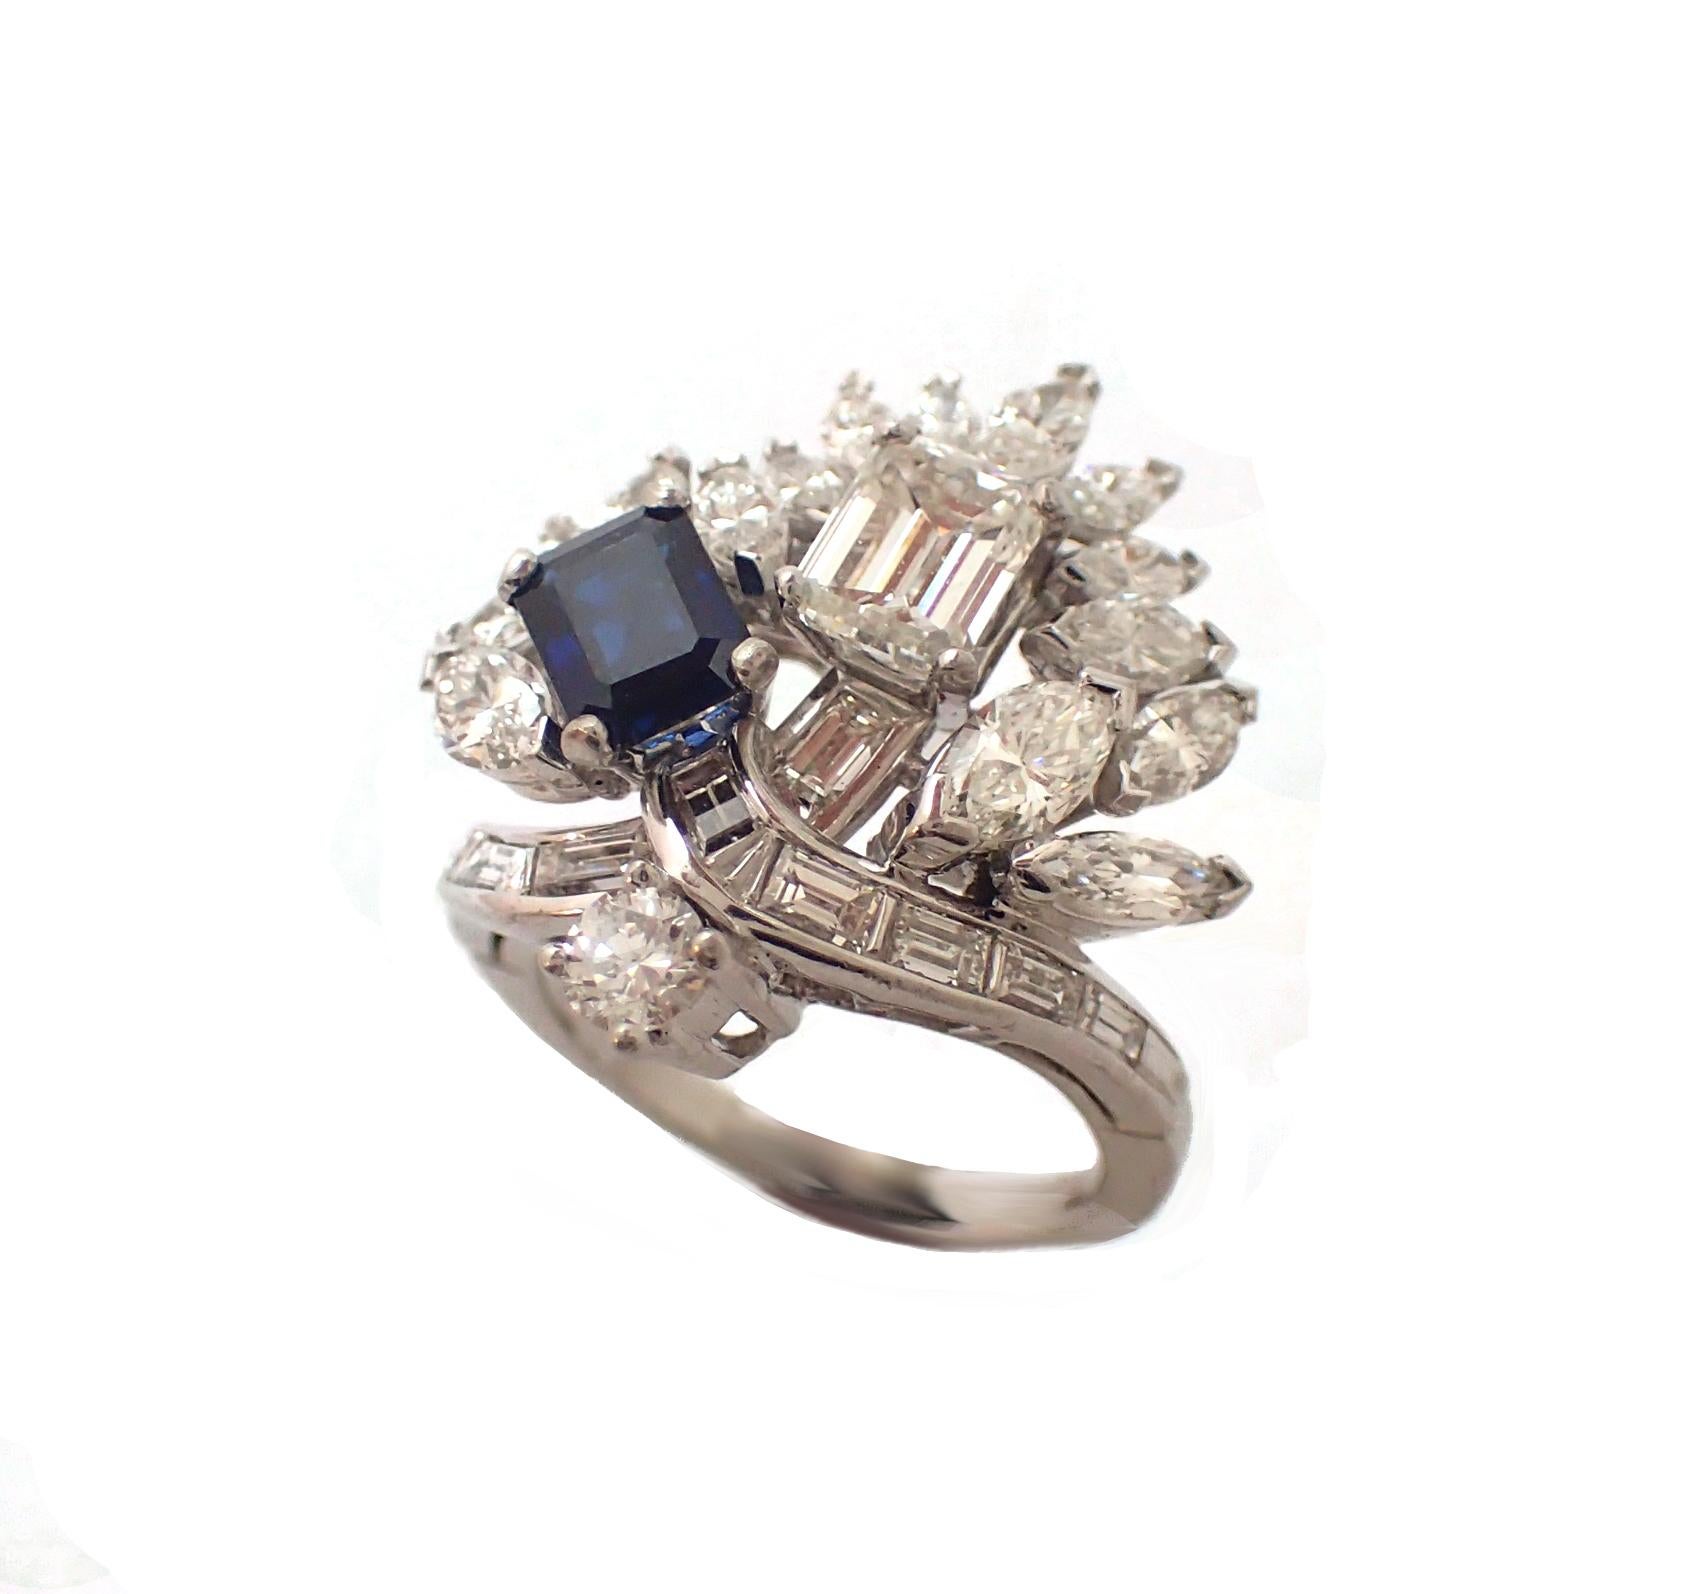 Elegant and stunning, this fanciful cocktail ring features an emerald cut sapphire and matching emerald cut diamond in a sea of marquise and baguette diamonds. The diamonds are G-H in color, VS in clarity, and boast a combined weight of over 3CT.